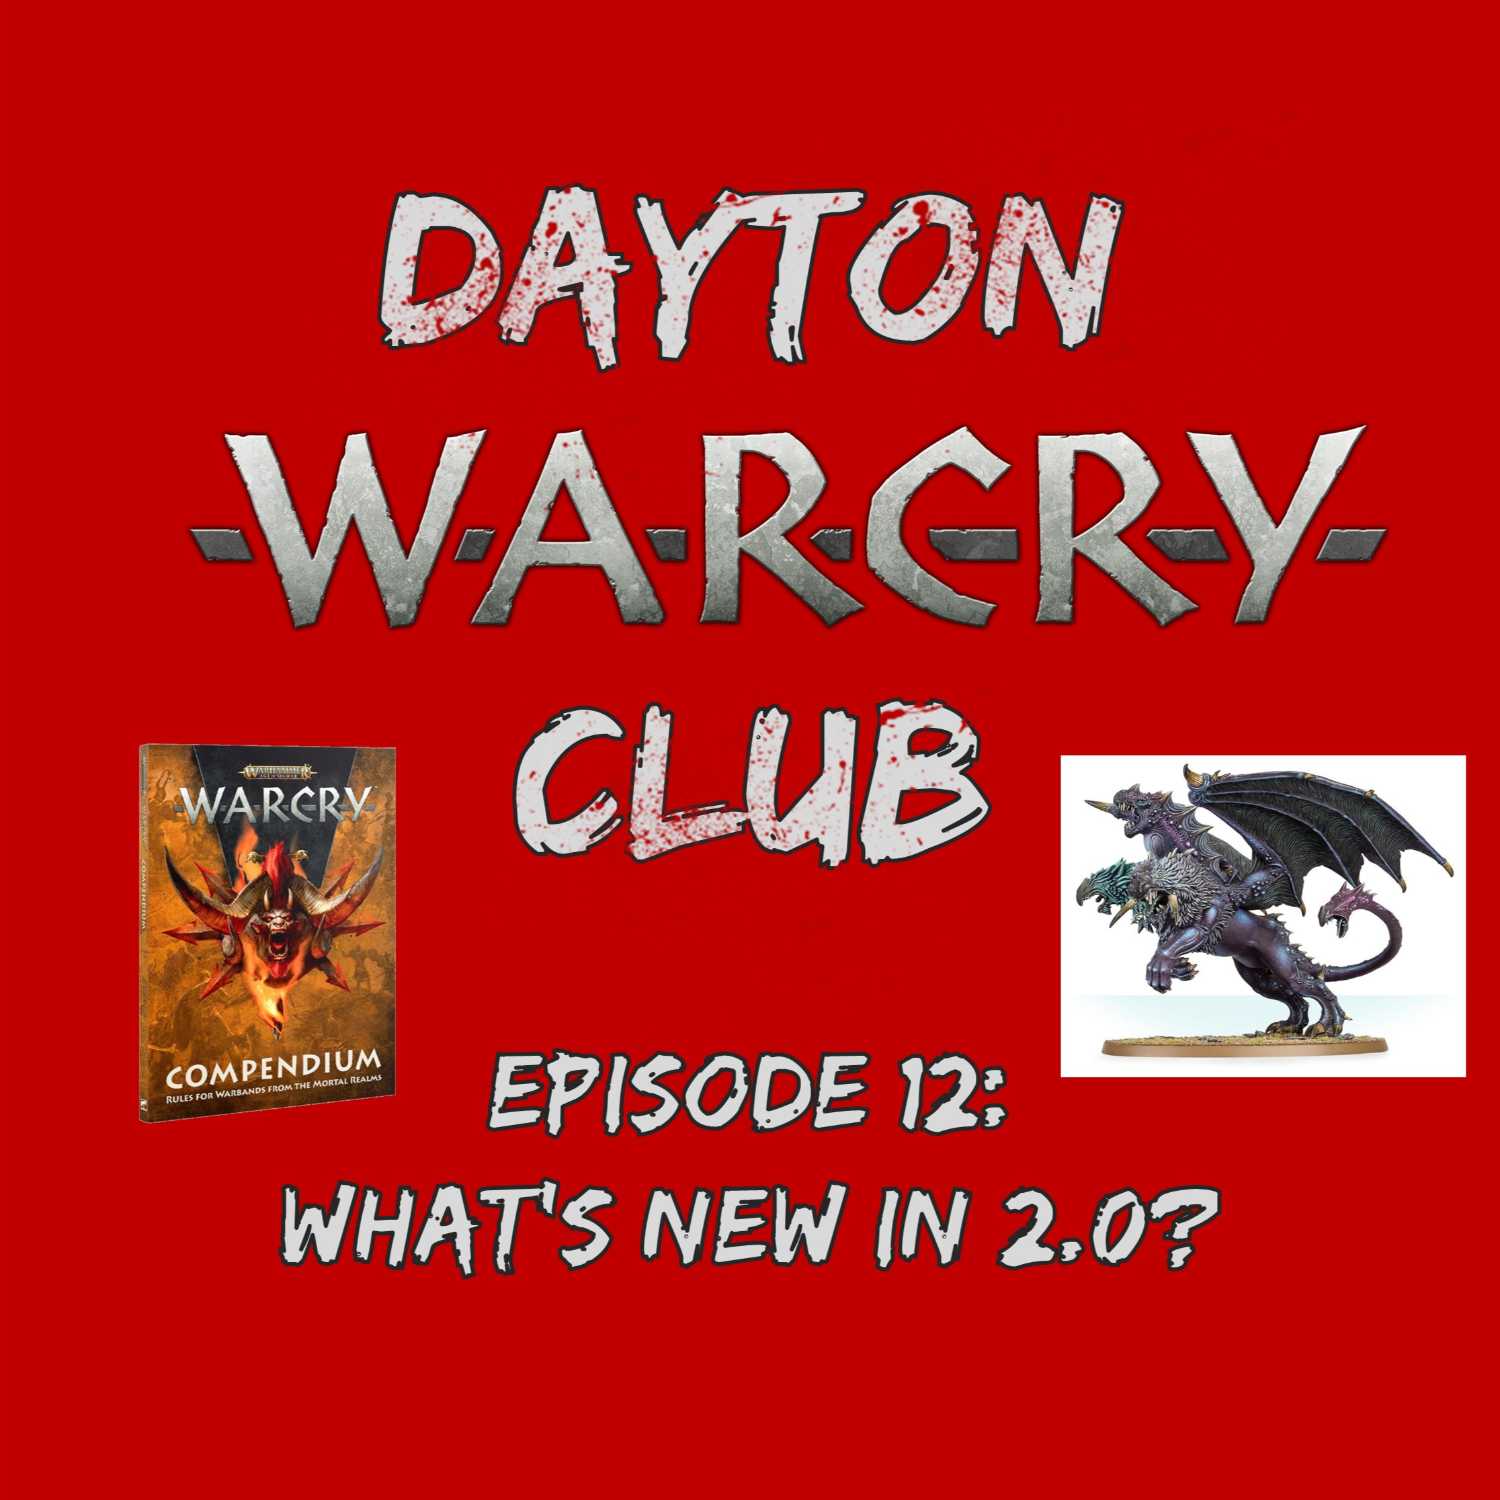 Dayton Warcry Club Episode 12: What's new in 2.0?